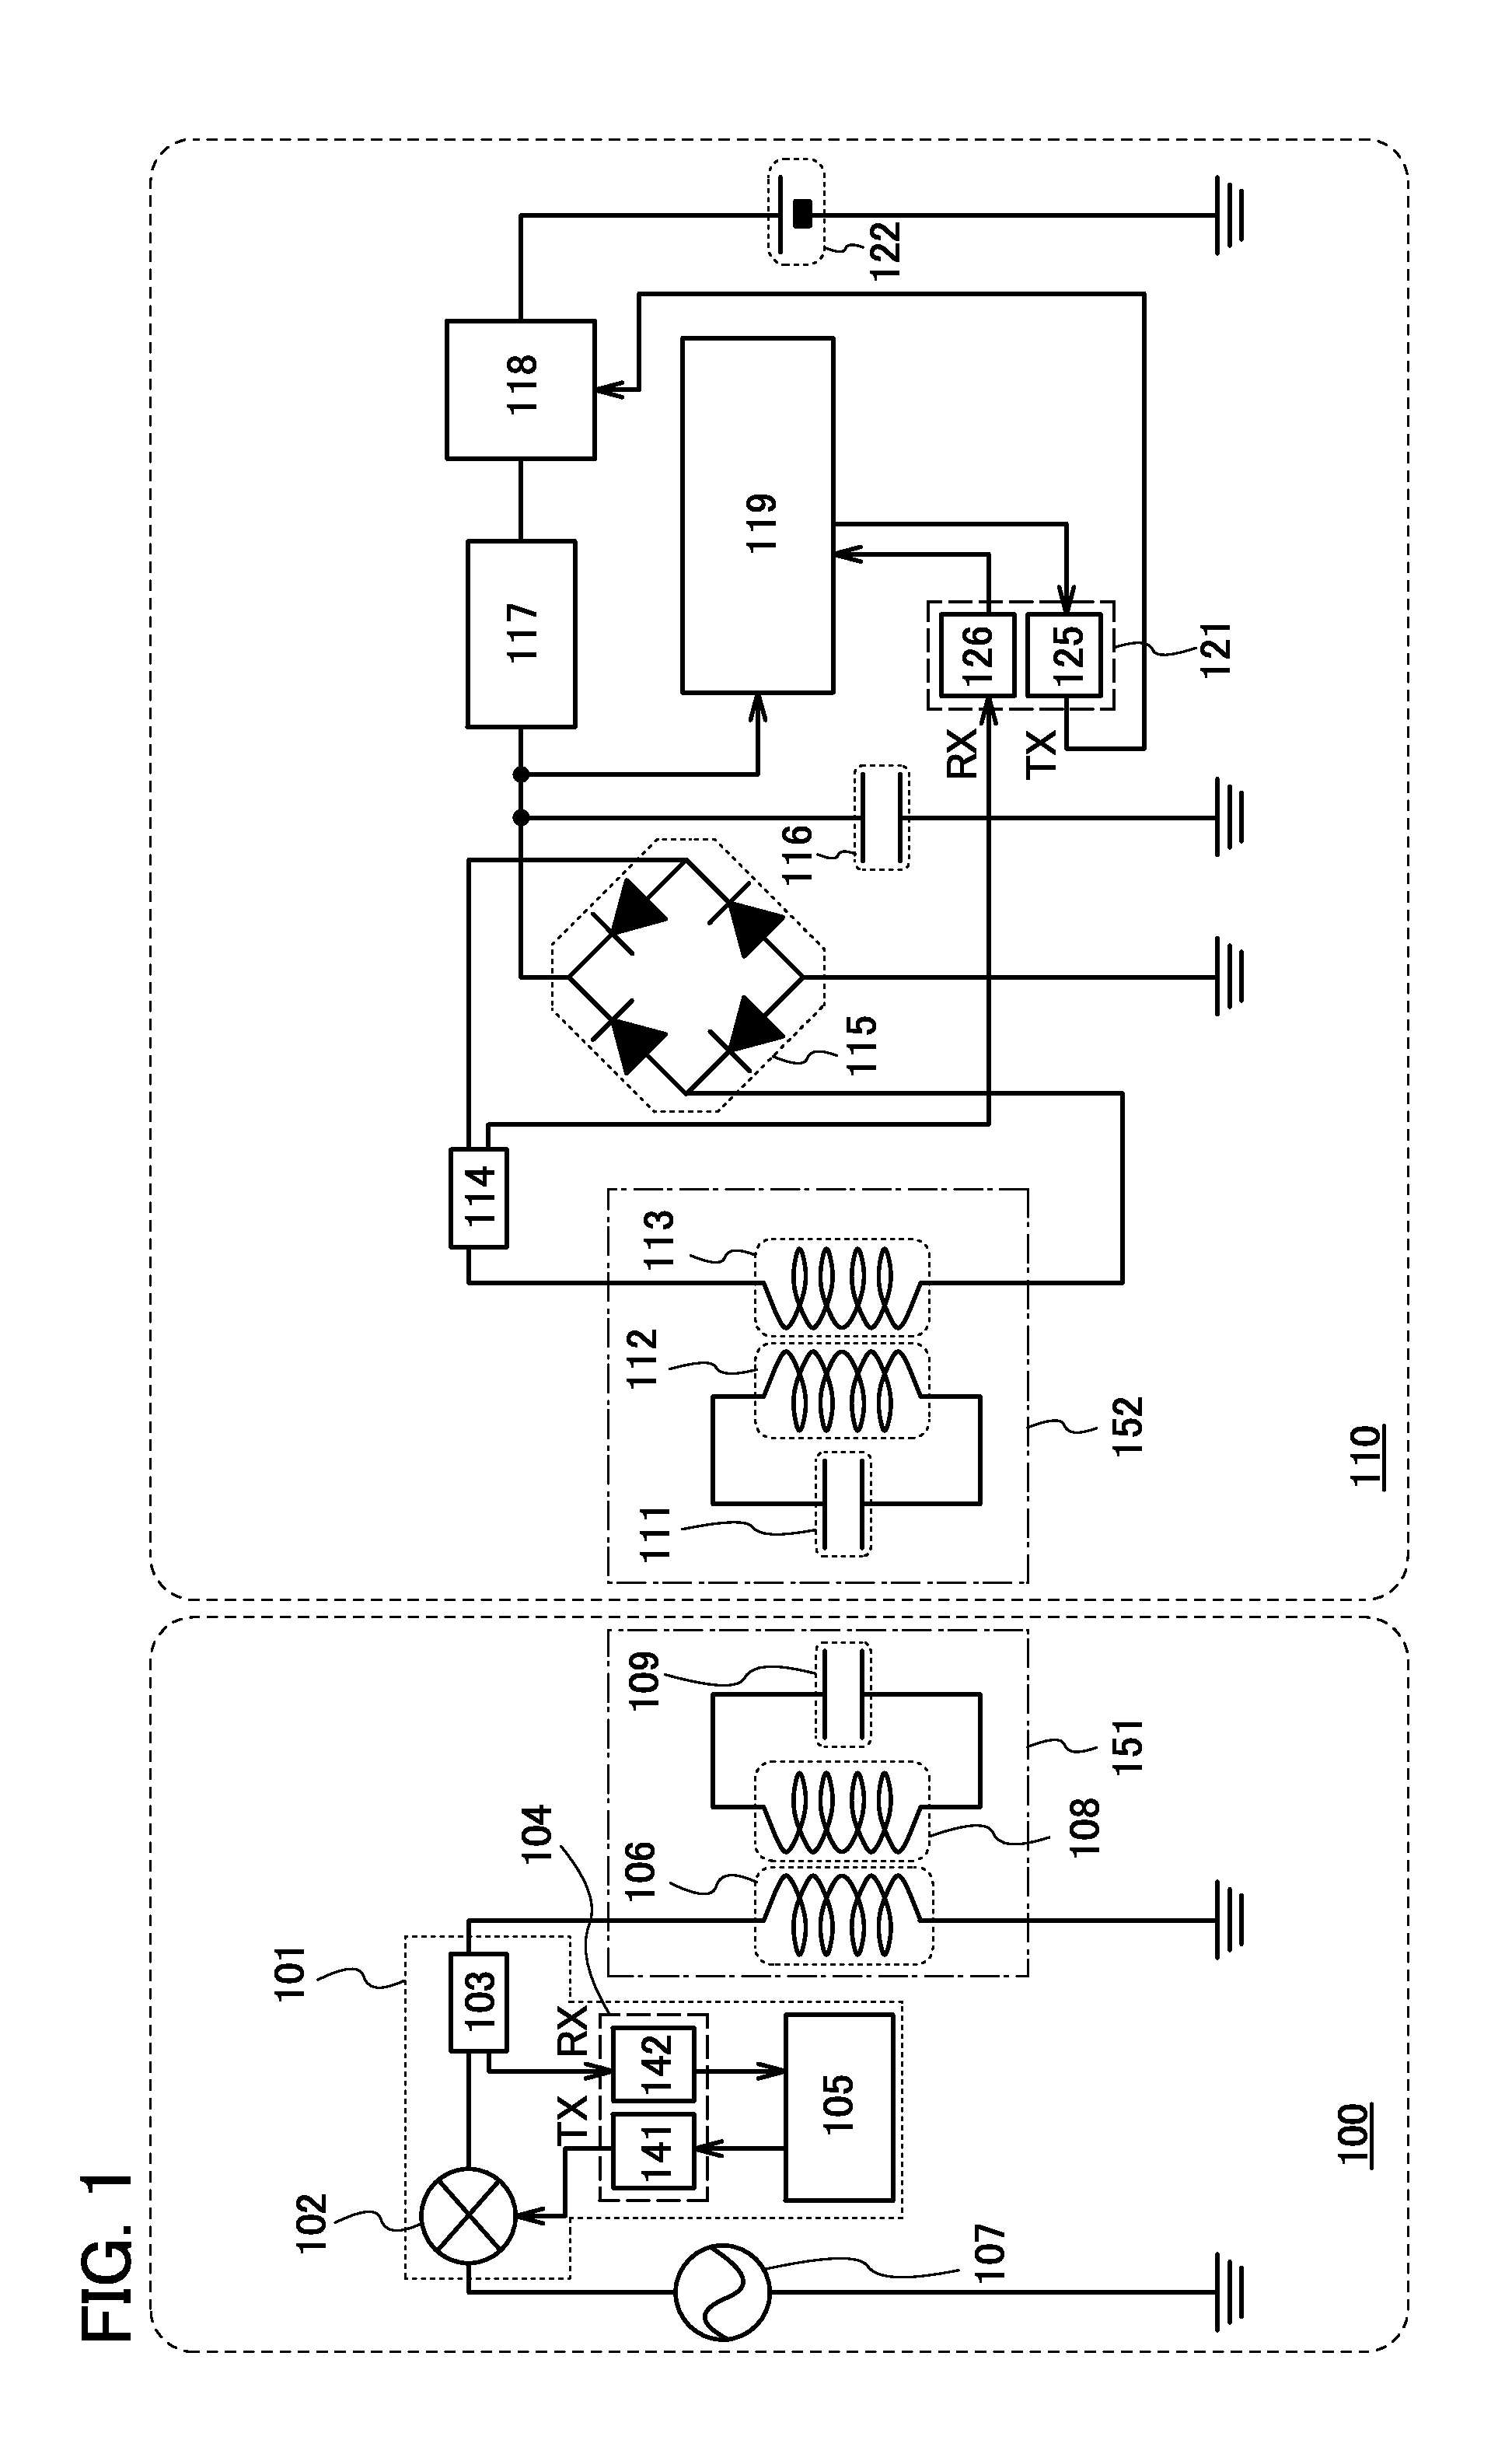 Contactless power feeding system